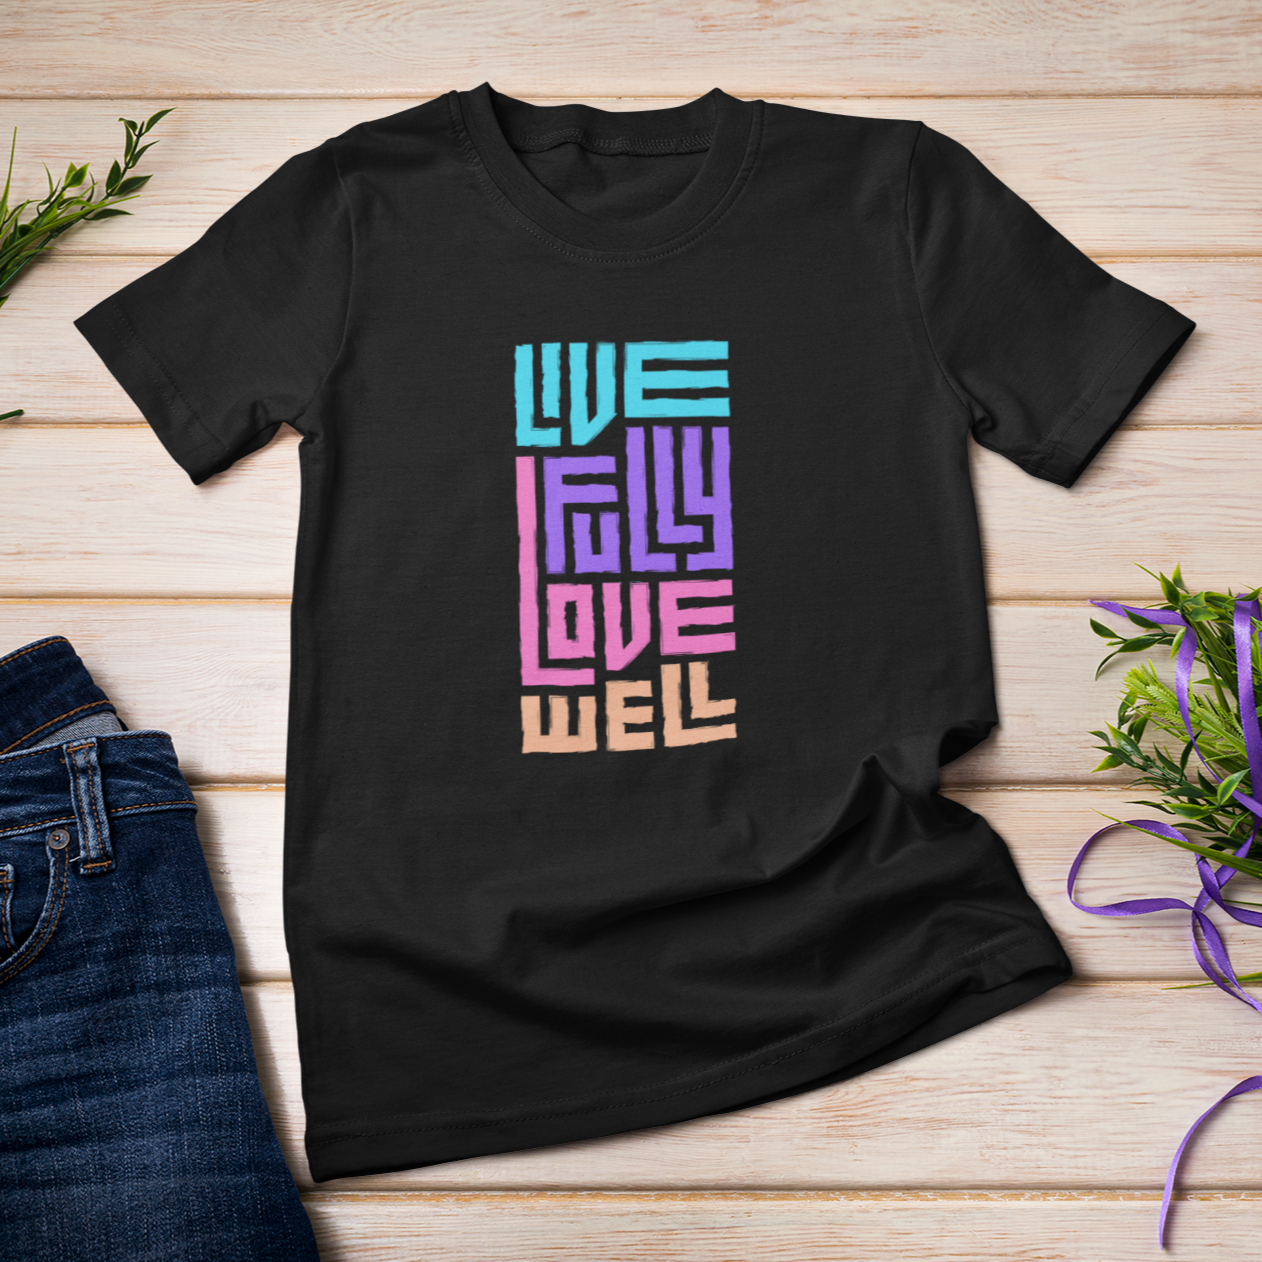 Story of Awakening Lifestyle Community Spirituality Relationships Love Light Meditation Oneness Earth Balance Healing Shop Store Charity Tree Nature Read Write T shirt Tops Tees Clothing Women Horoscope Organic Cotton Live Fully Love Well Quote